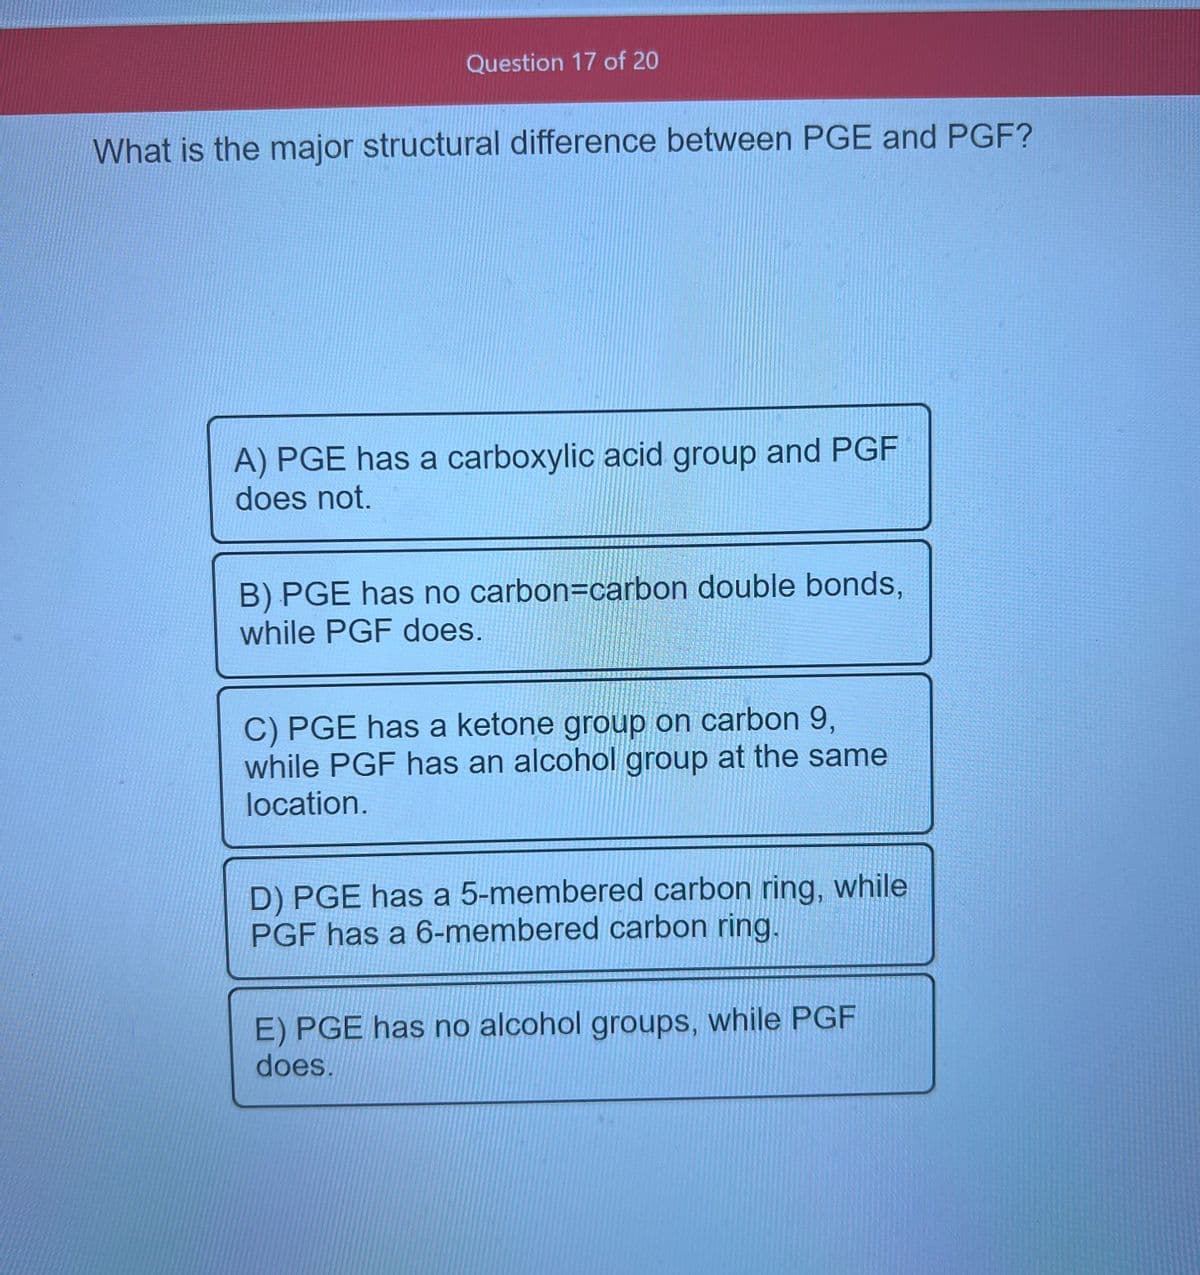 Question 17 of 20
What is the major structural difference between PGE and PGF?
A) PGE has a carboxylic acid group and PGF
does not.
B) PGE has no carbon=carbon double bonds,
while PGF does.
C) PGE has a ketone group on carbon 9,
while PGF has an alcohol group at the same
location.
D) PGE has a 5-membered carbon ring, while
PGF has a 6-membered carbon ring.
E) PGE has no alcohol groups, while PGF
does.